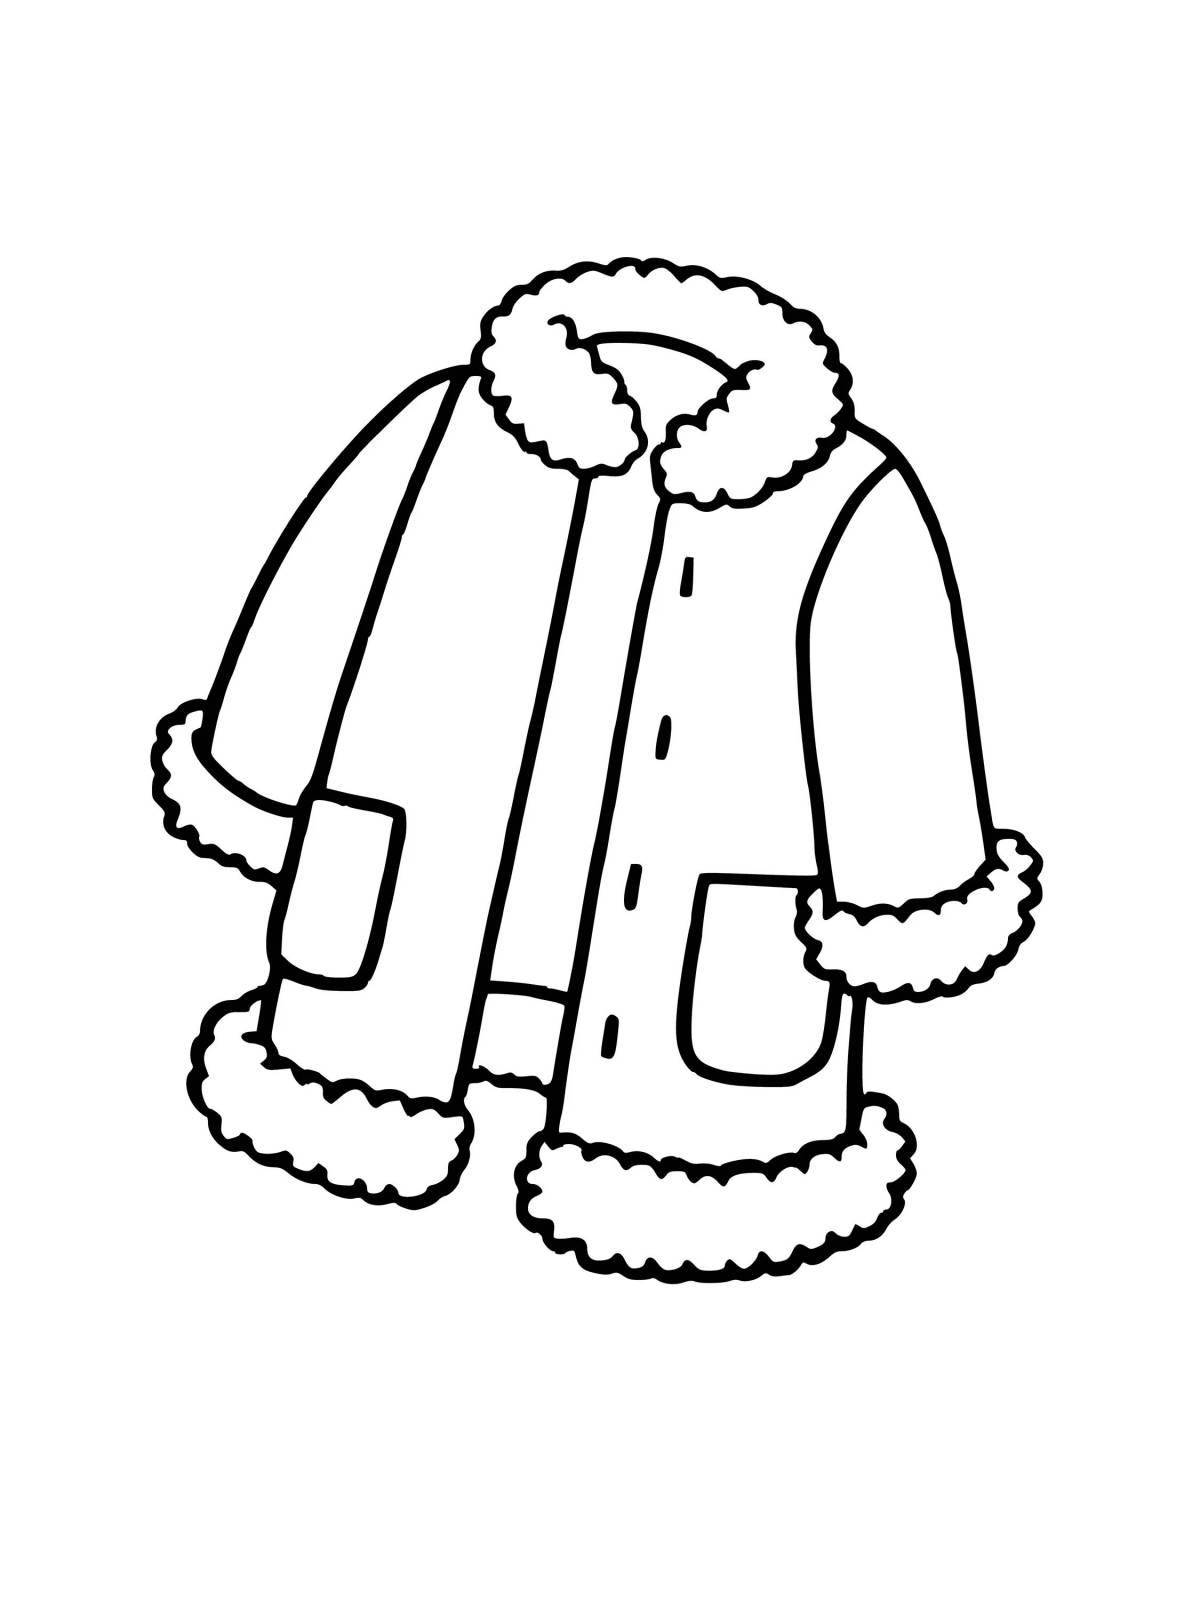 Coloring pages of winter clothes with crazy colors for 4-5 year olds